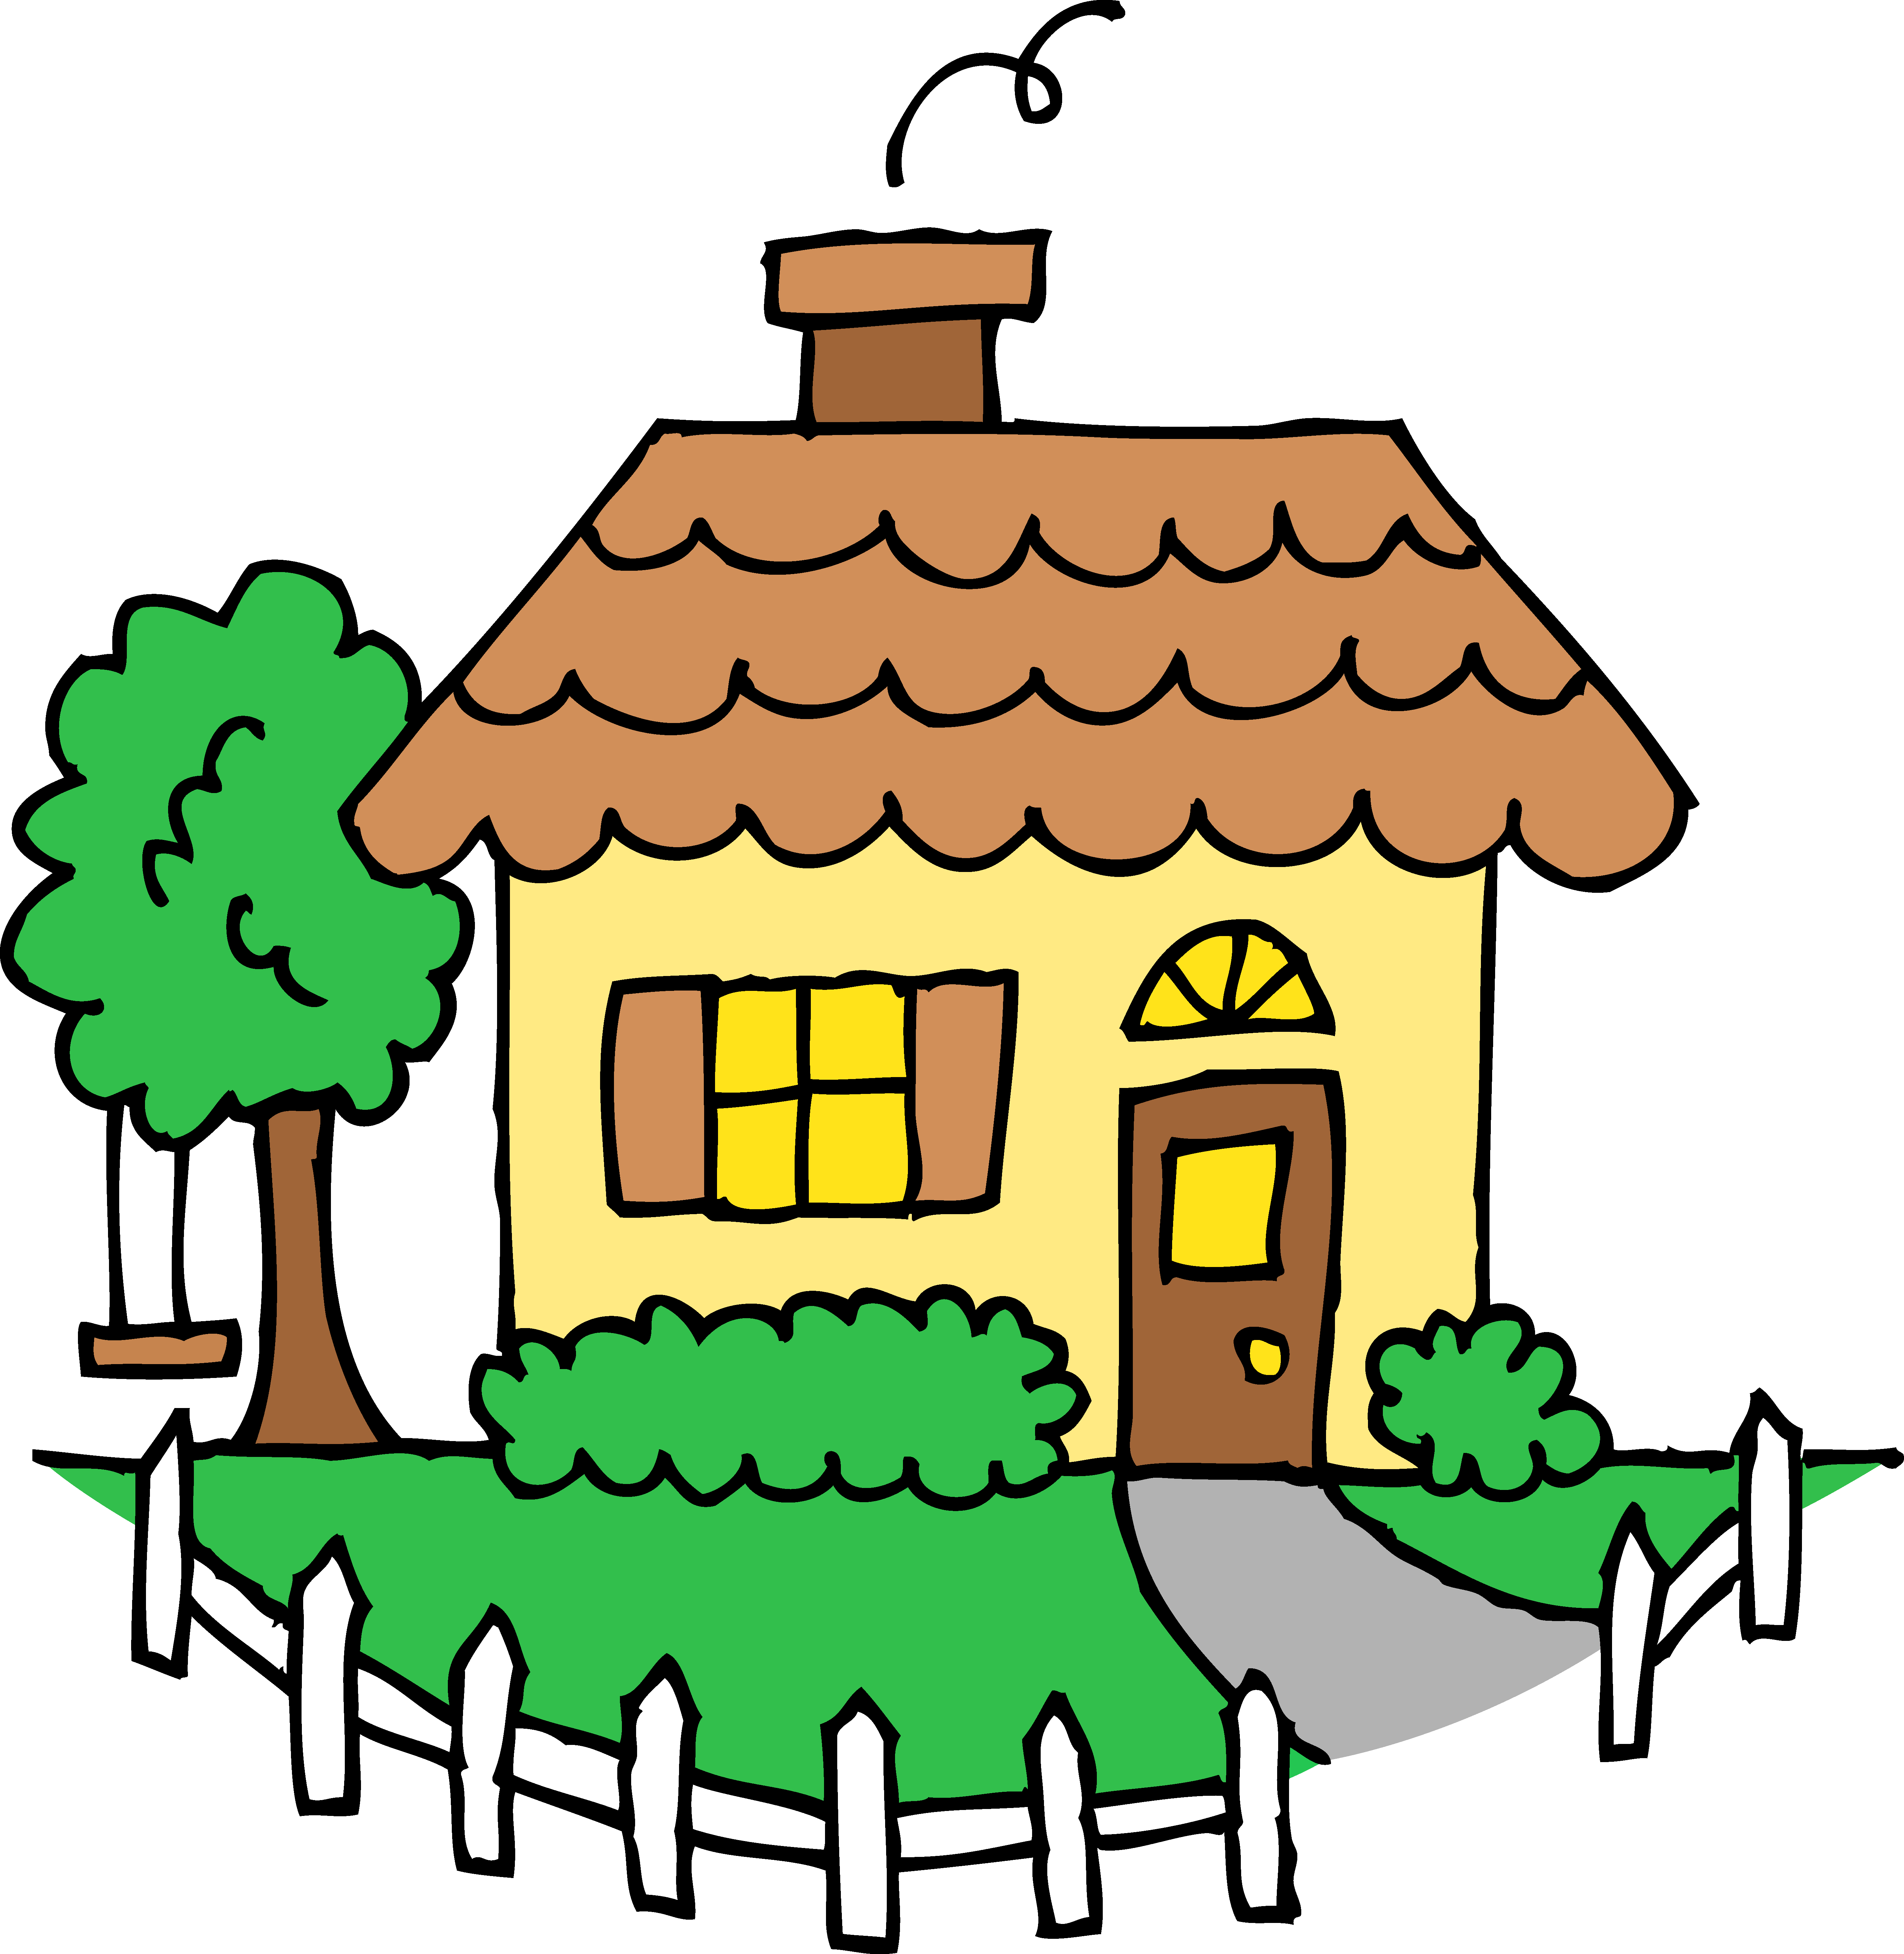 Clip Art Image Of Homes